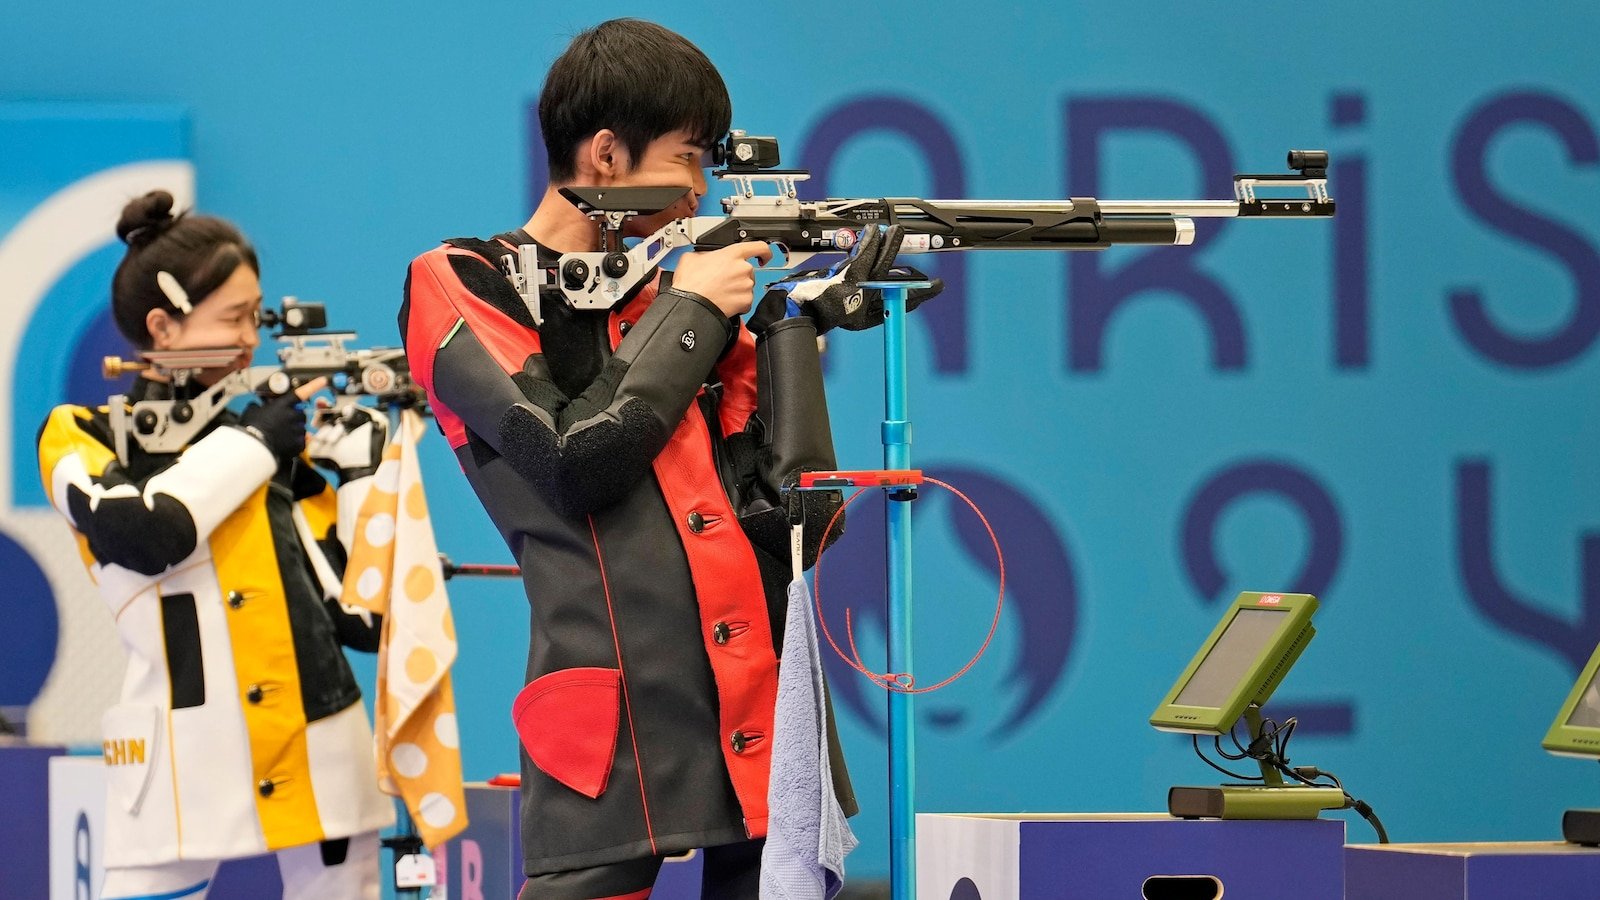 China wins the first gold medal of the 2024 Olympics in mixed team air rifle shooting